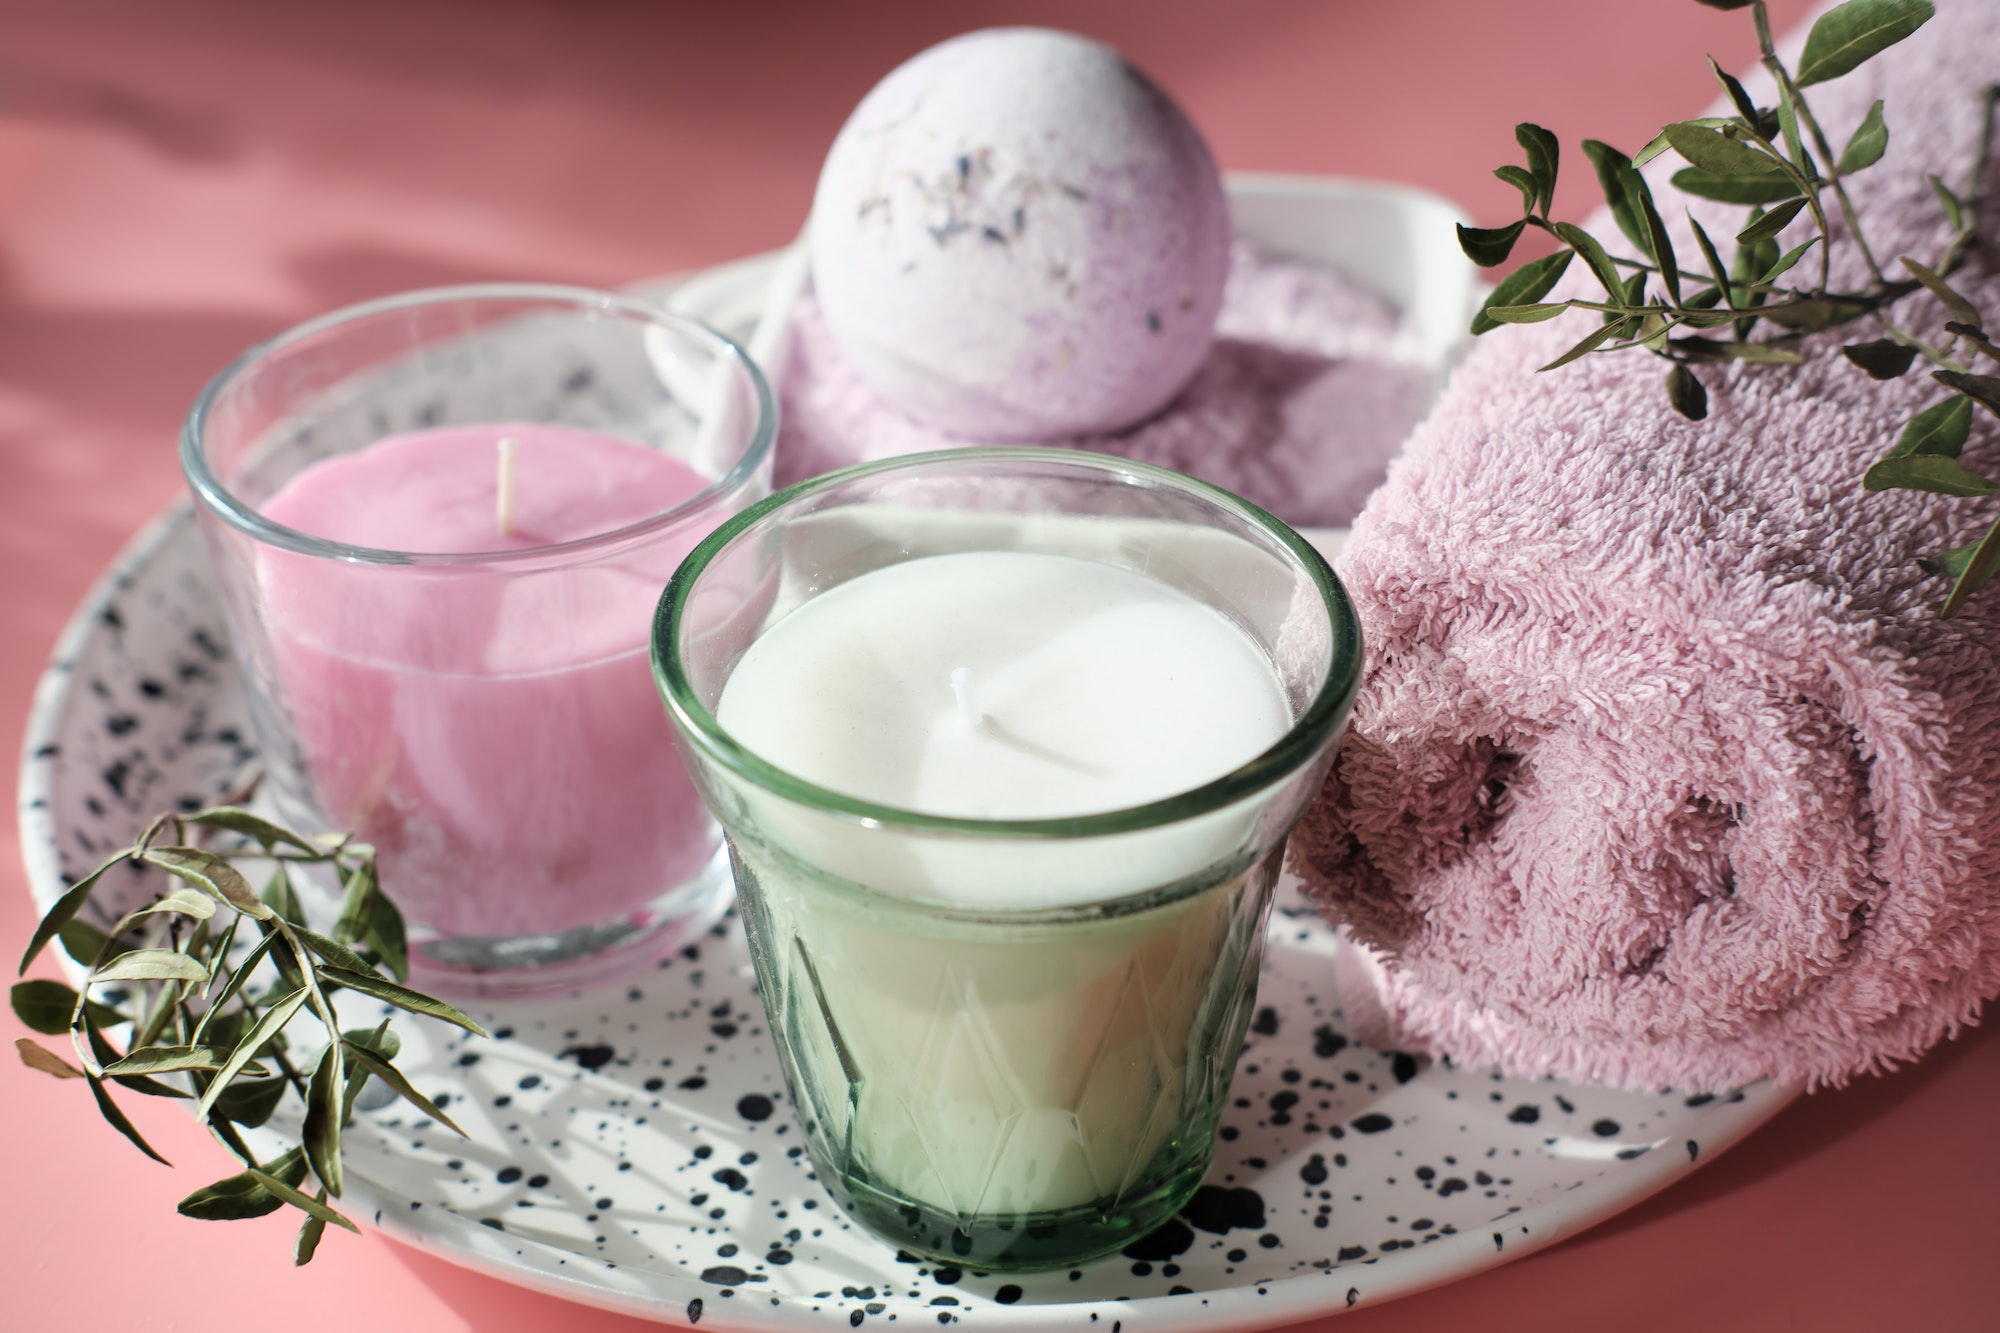 scented soy wax candles and bath bomb and pink towel on pink background. wellness set